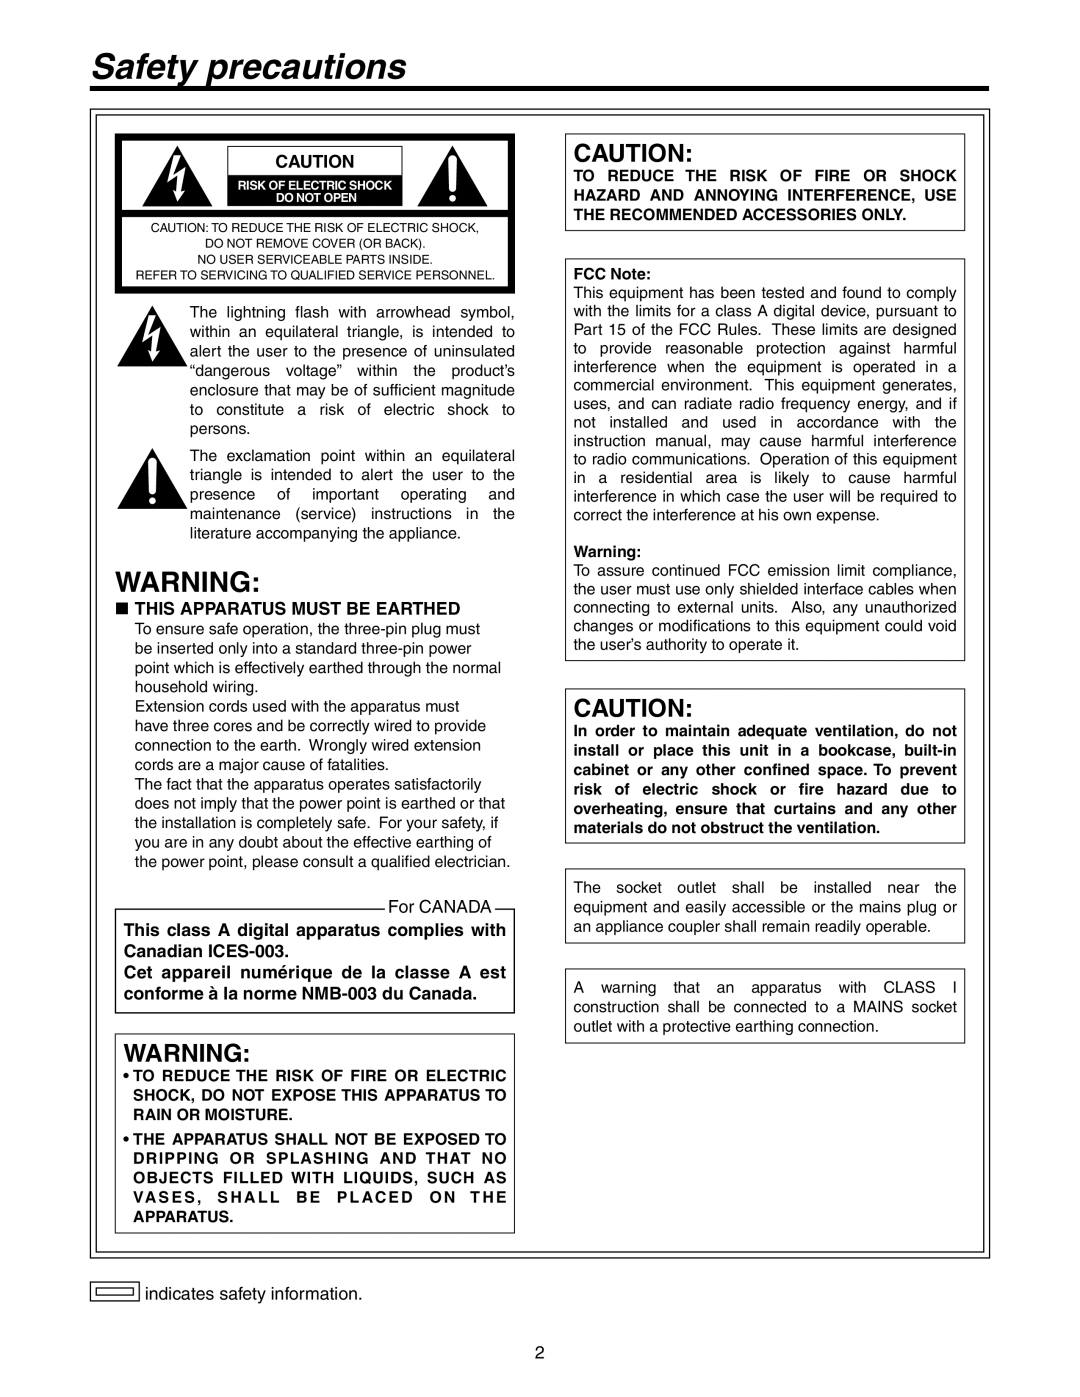 Panasonic AW-HS50N operating instructions Safety precautions, This Apparatus Must Be Earthed 